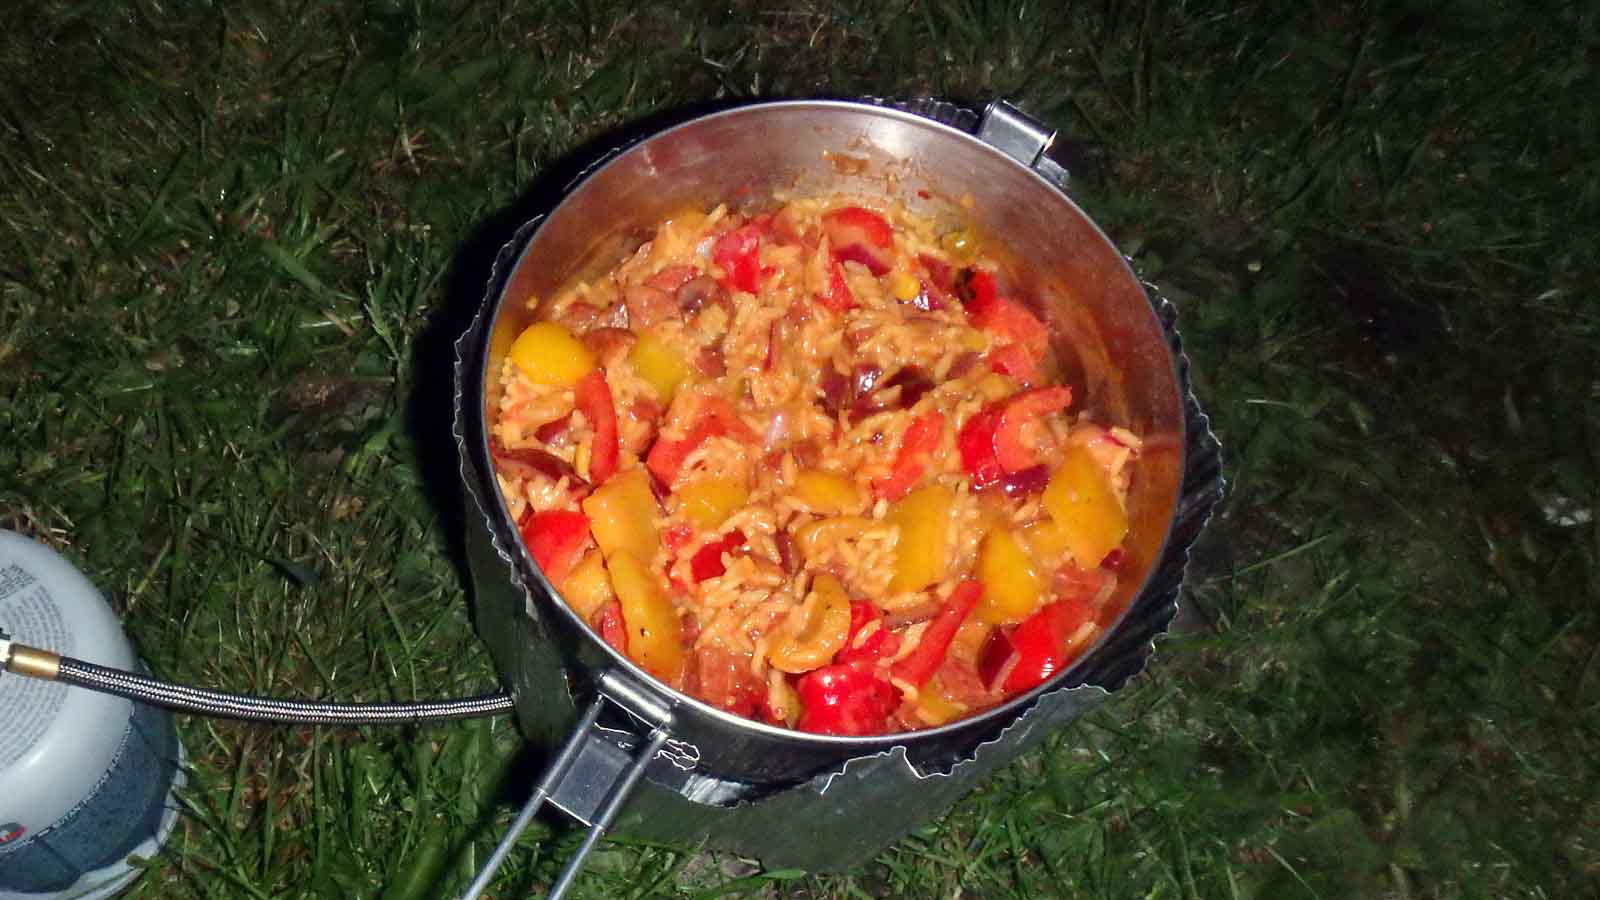 Image of Mexican Fried Rice in a camping pot simmering over a stove.